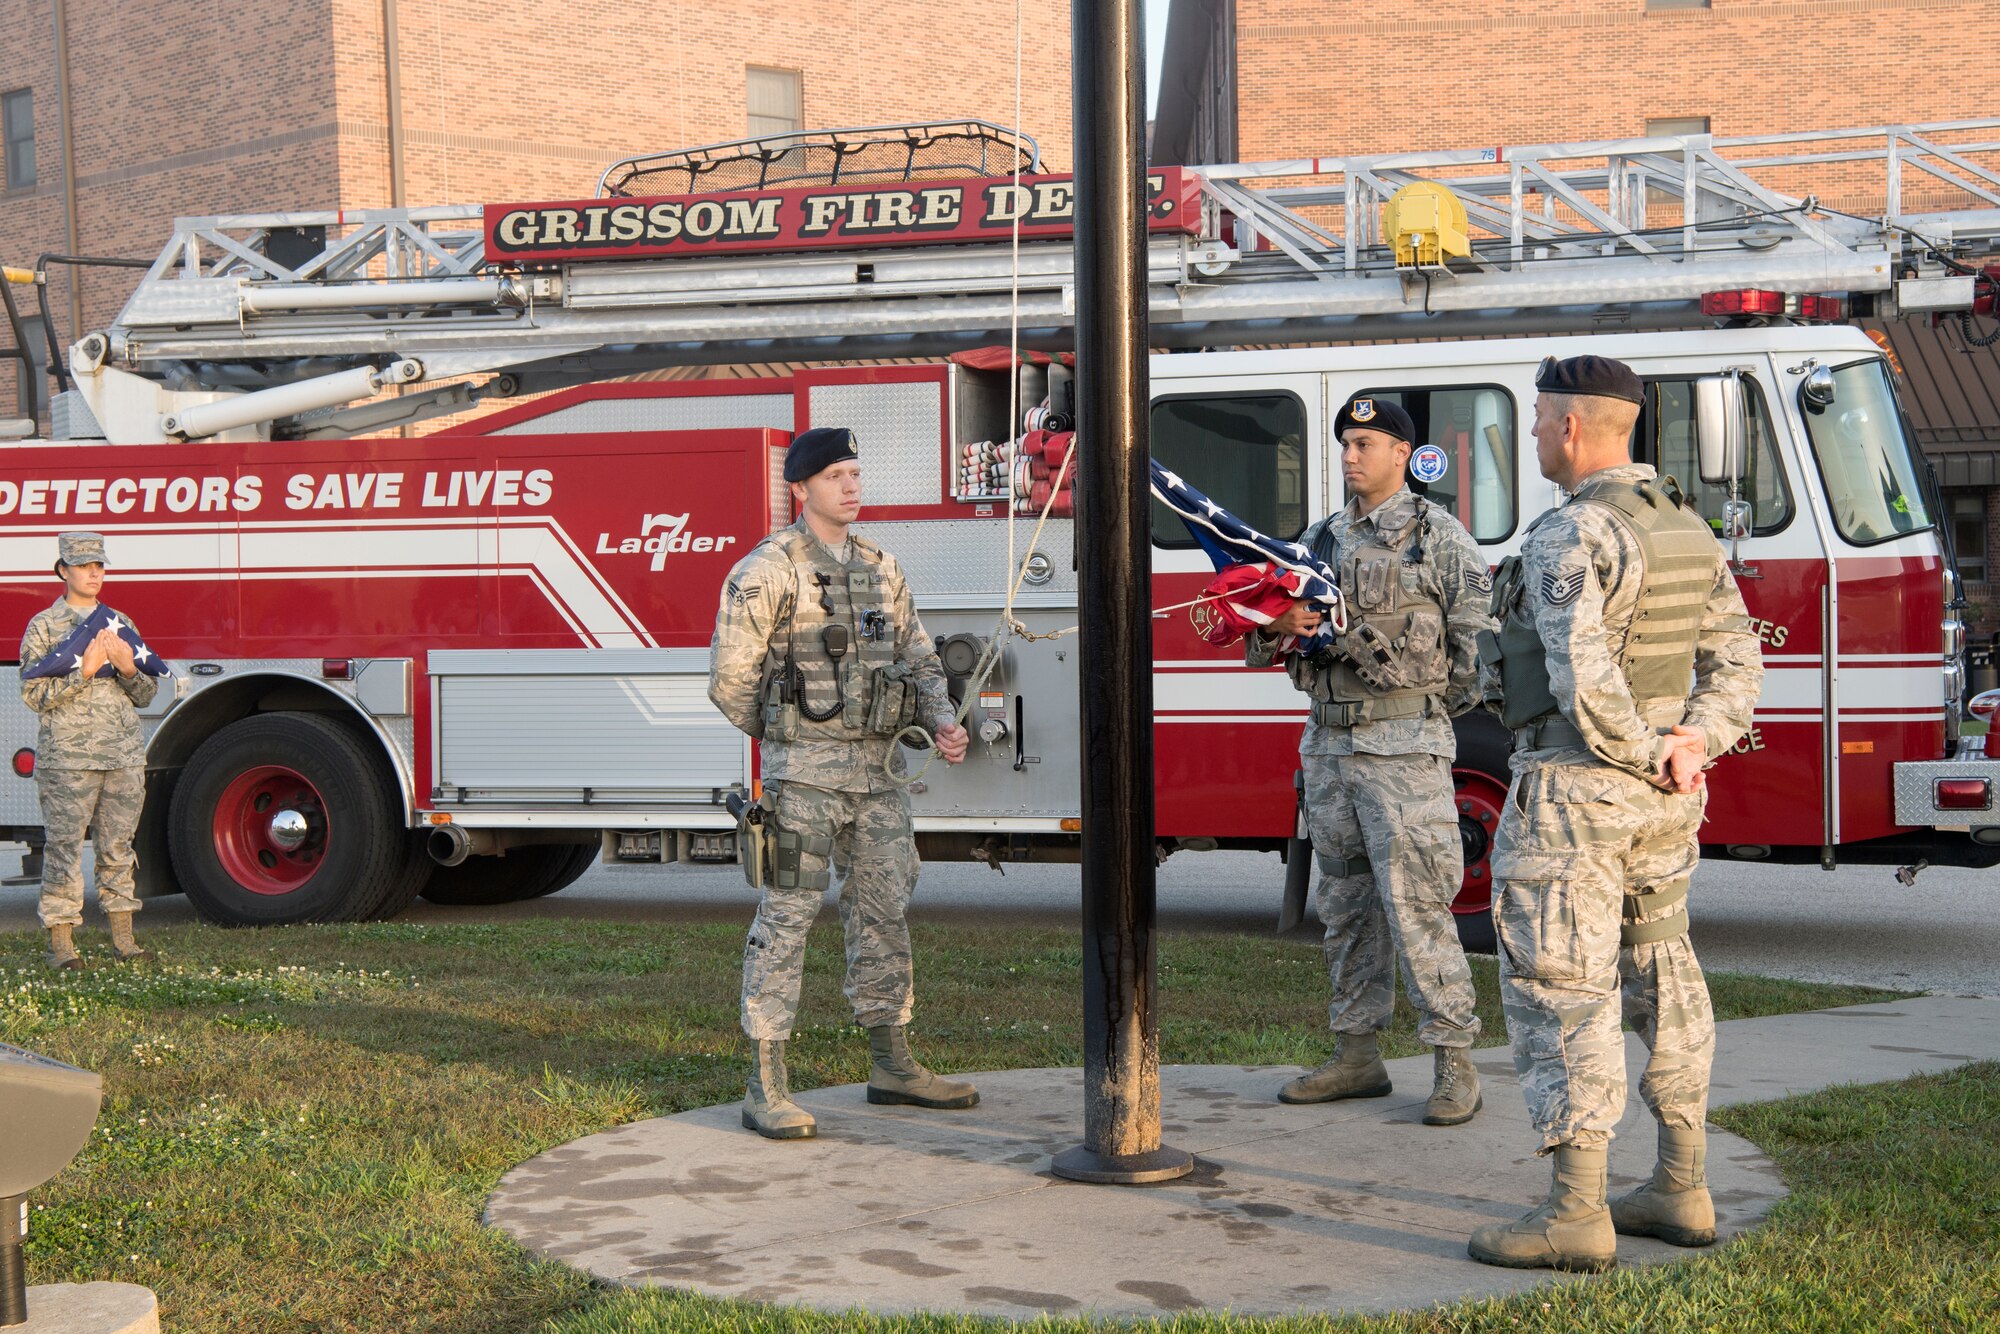 Members from the 434th Security Forces Squadron, from left to right, Senior Airman Devin Cleaver, Staff Sgt. Steve Salazar and Tech. Sgt. Tim Augustyn prepare to raise the American flag to half-staff during a 9/11 memorial ceremony at Grissom Air Reserve Base, Ind. Sept. 11, 2018. During the ceremony, more than 50 firemen, police, Airmen, NCOs, Officers, and civilians came together to pay their respects. (U.S. Air Force Photo/Tech. Sgt. Benjamin Mota)